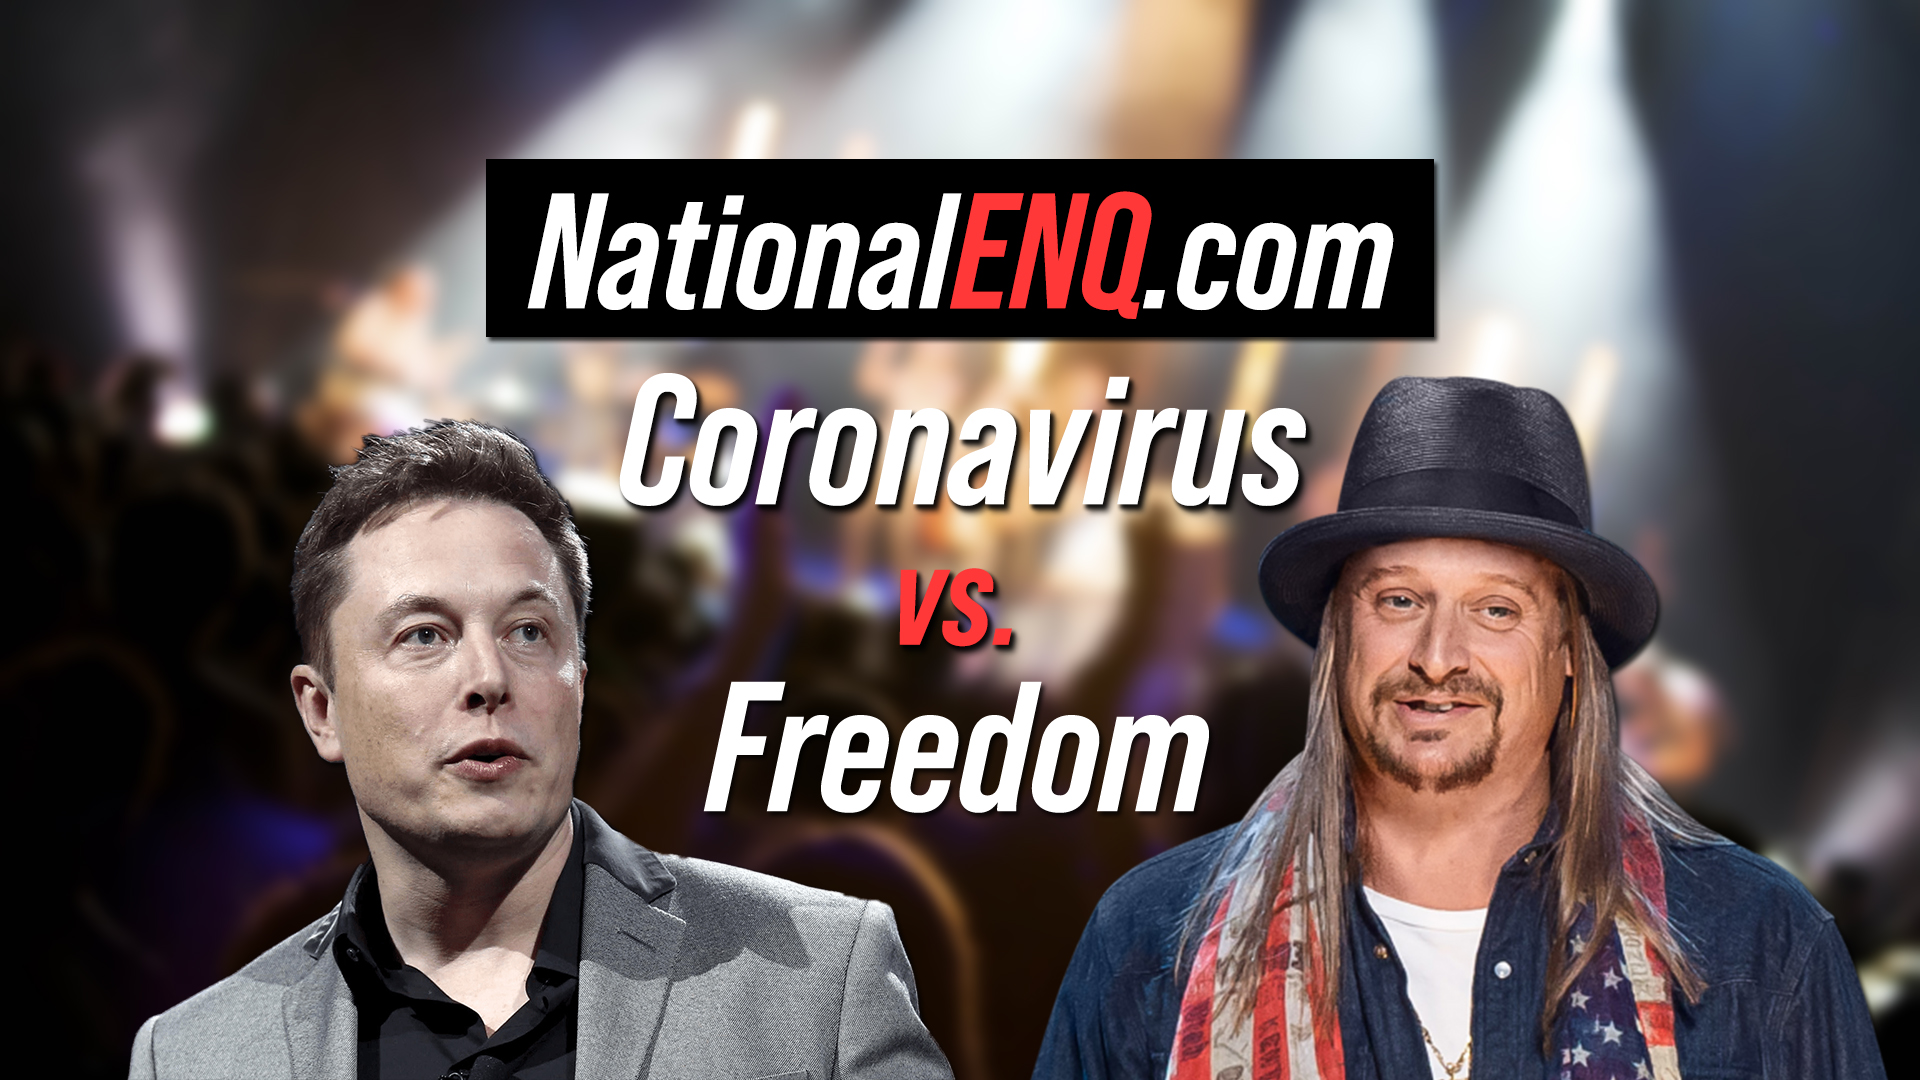 National ENQ Opens National Enquirer: Coronavirus House Arrest or Keep on Living? Kid Rock & Celebrities Want to Keep Bars & Businesses Open